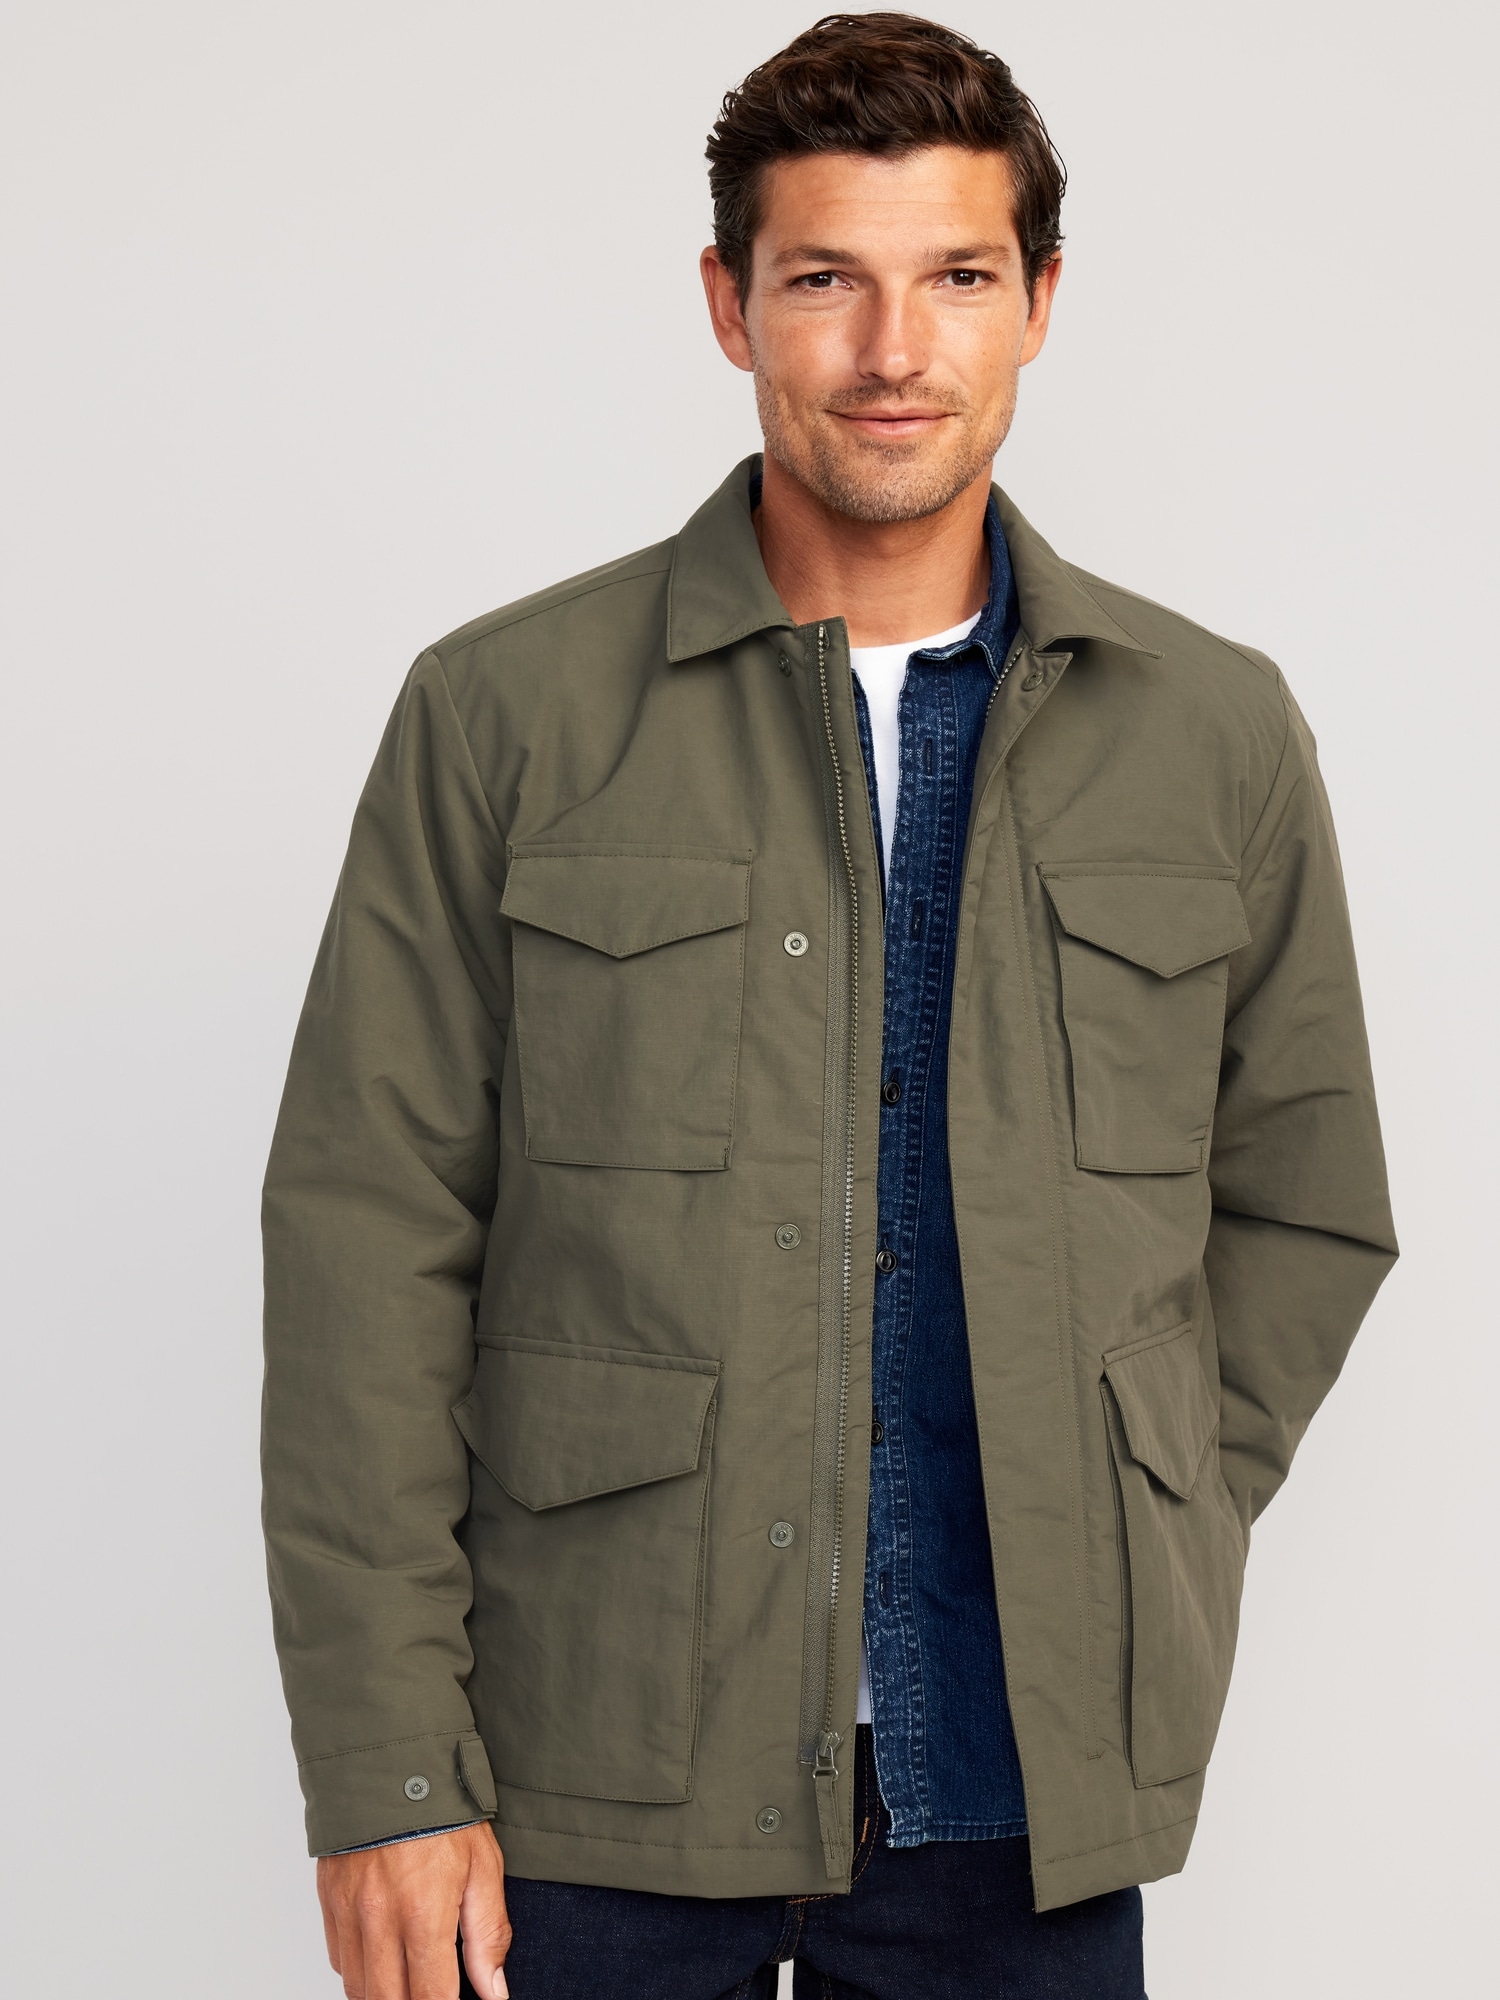 Old Navy PowerSoft Coze Edition Zip-Front Jacket for Men - ShopStyle